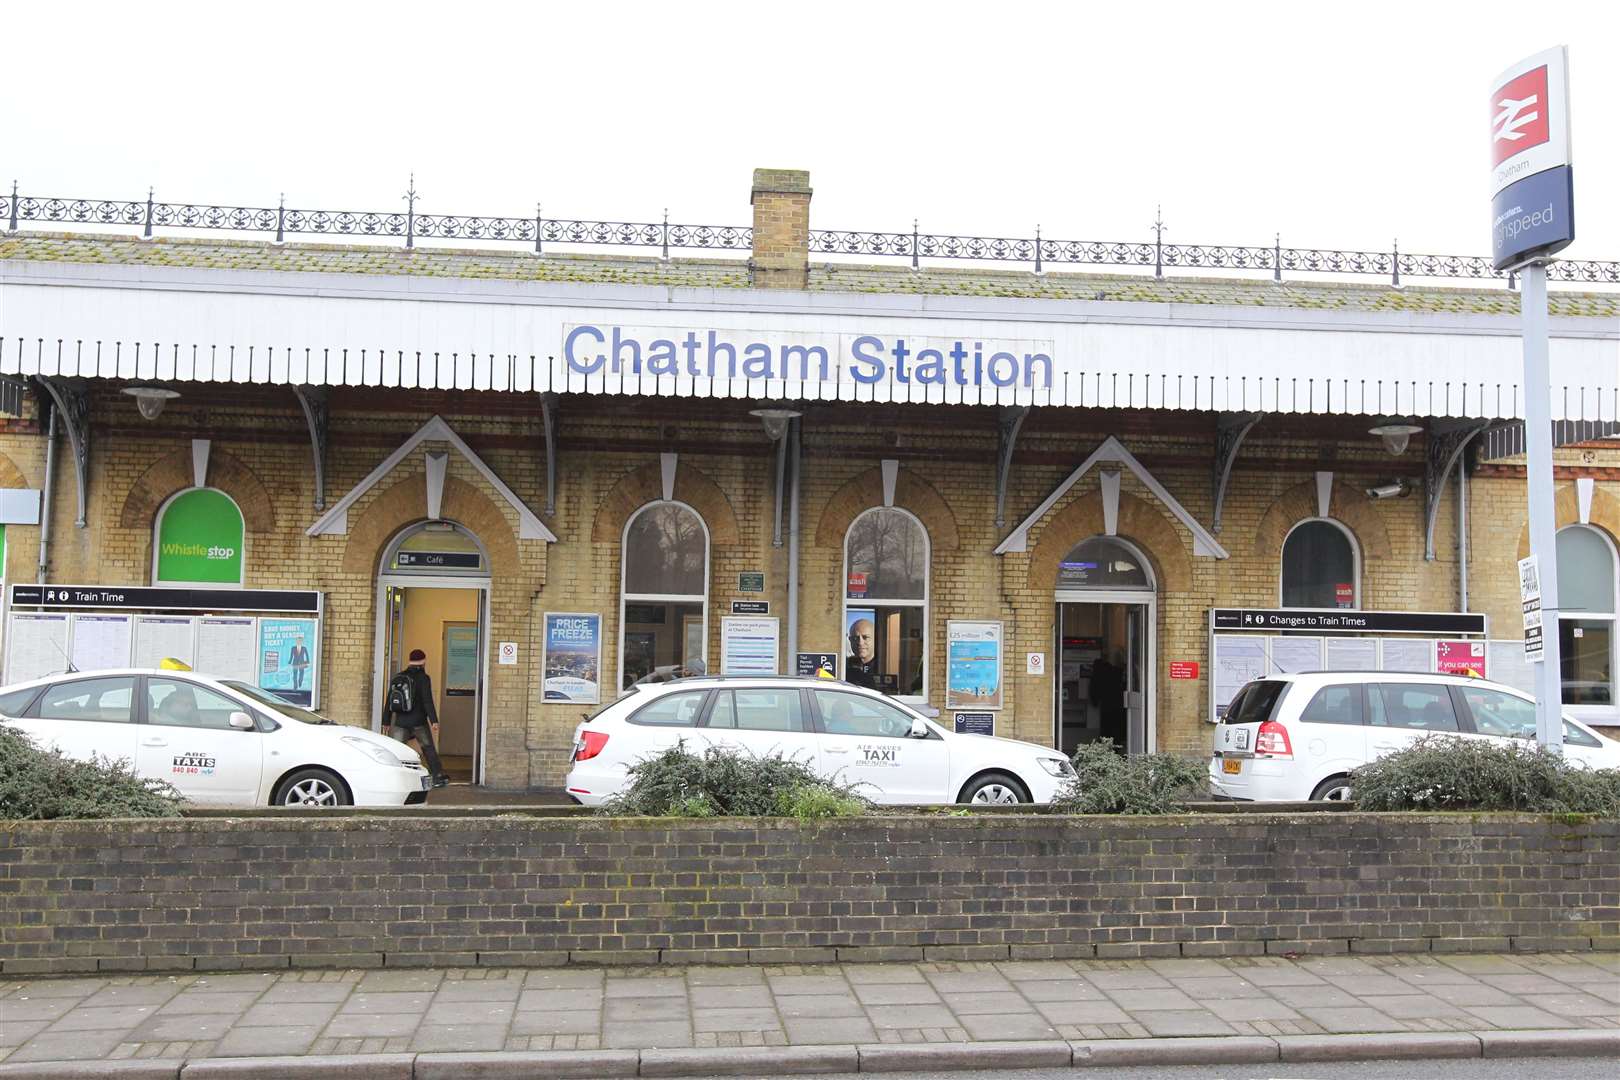 Chatham Railway Station Picture: John Westhrop